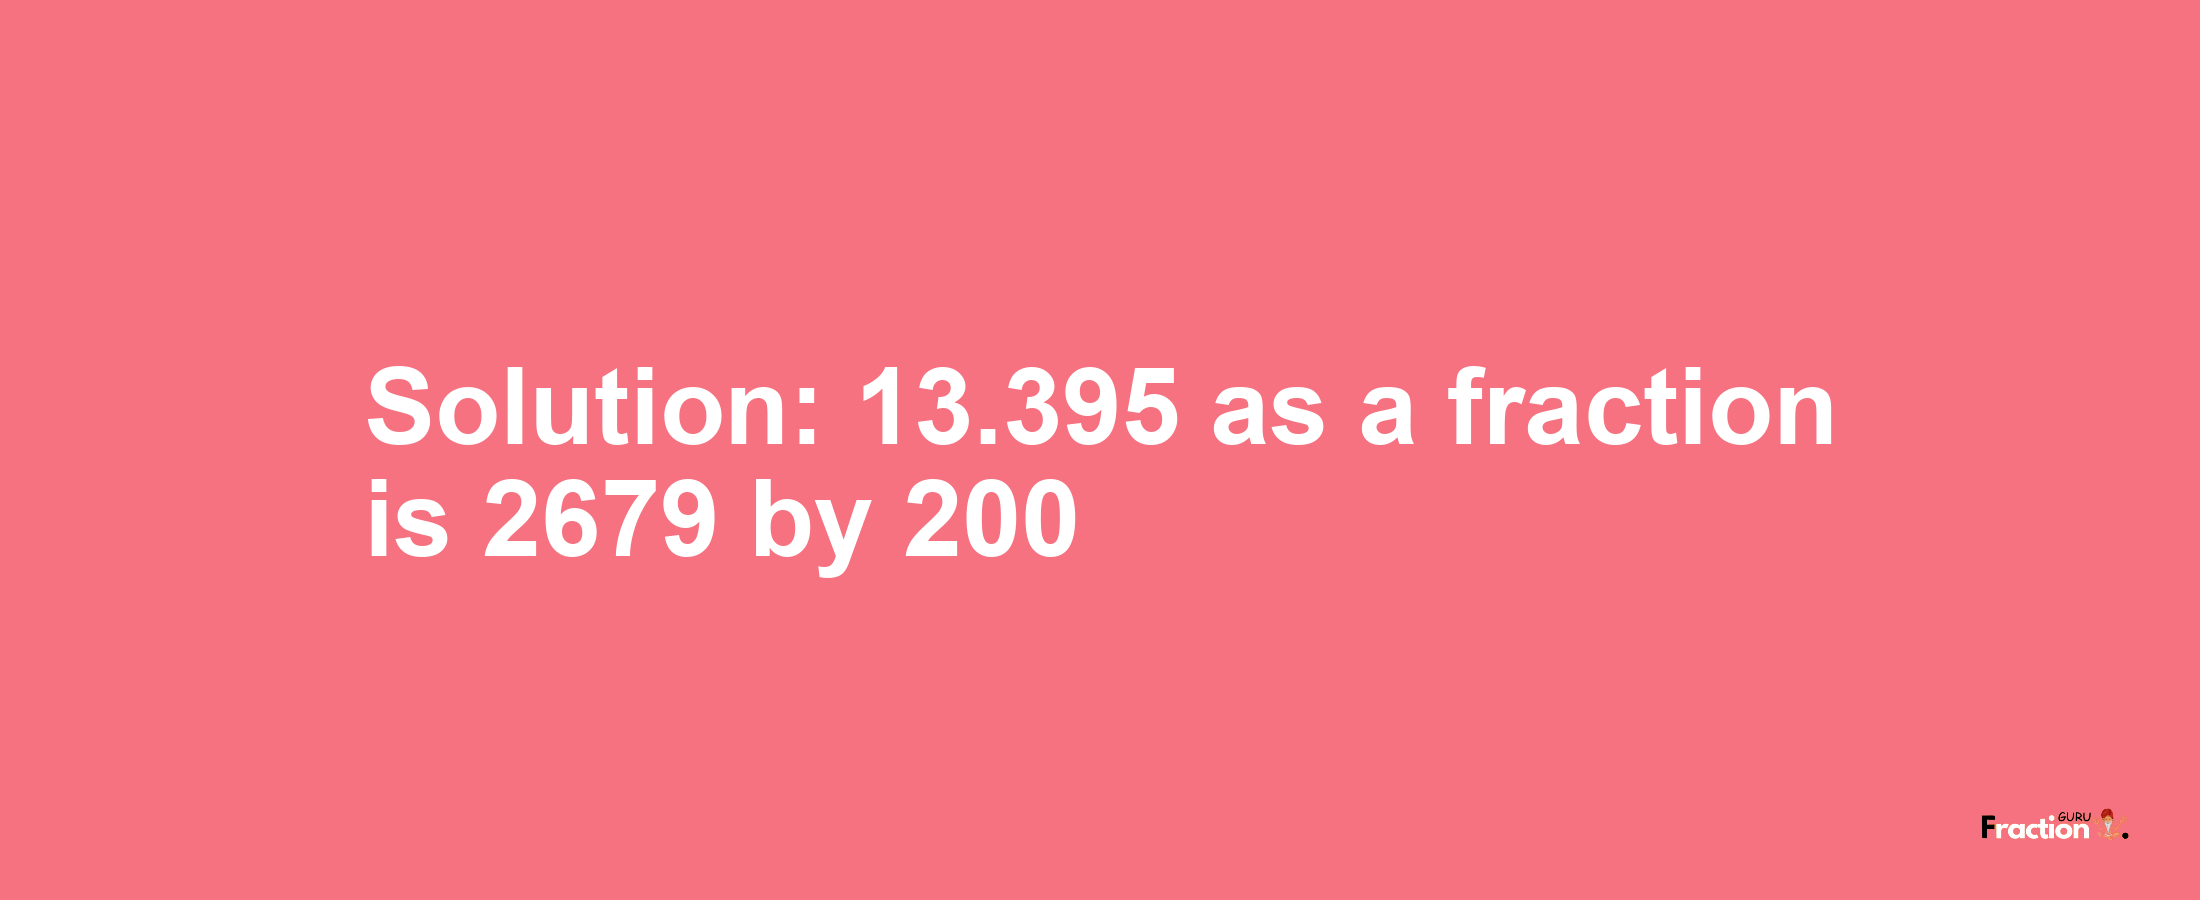 Solution:13.395 as a fraction is 2679/200